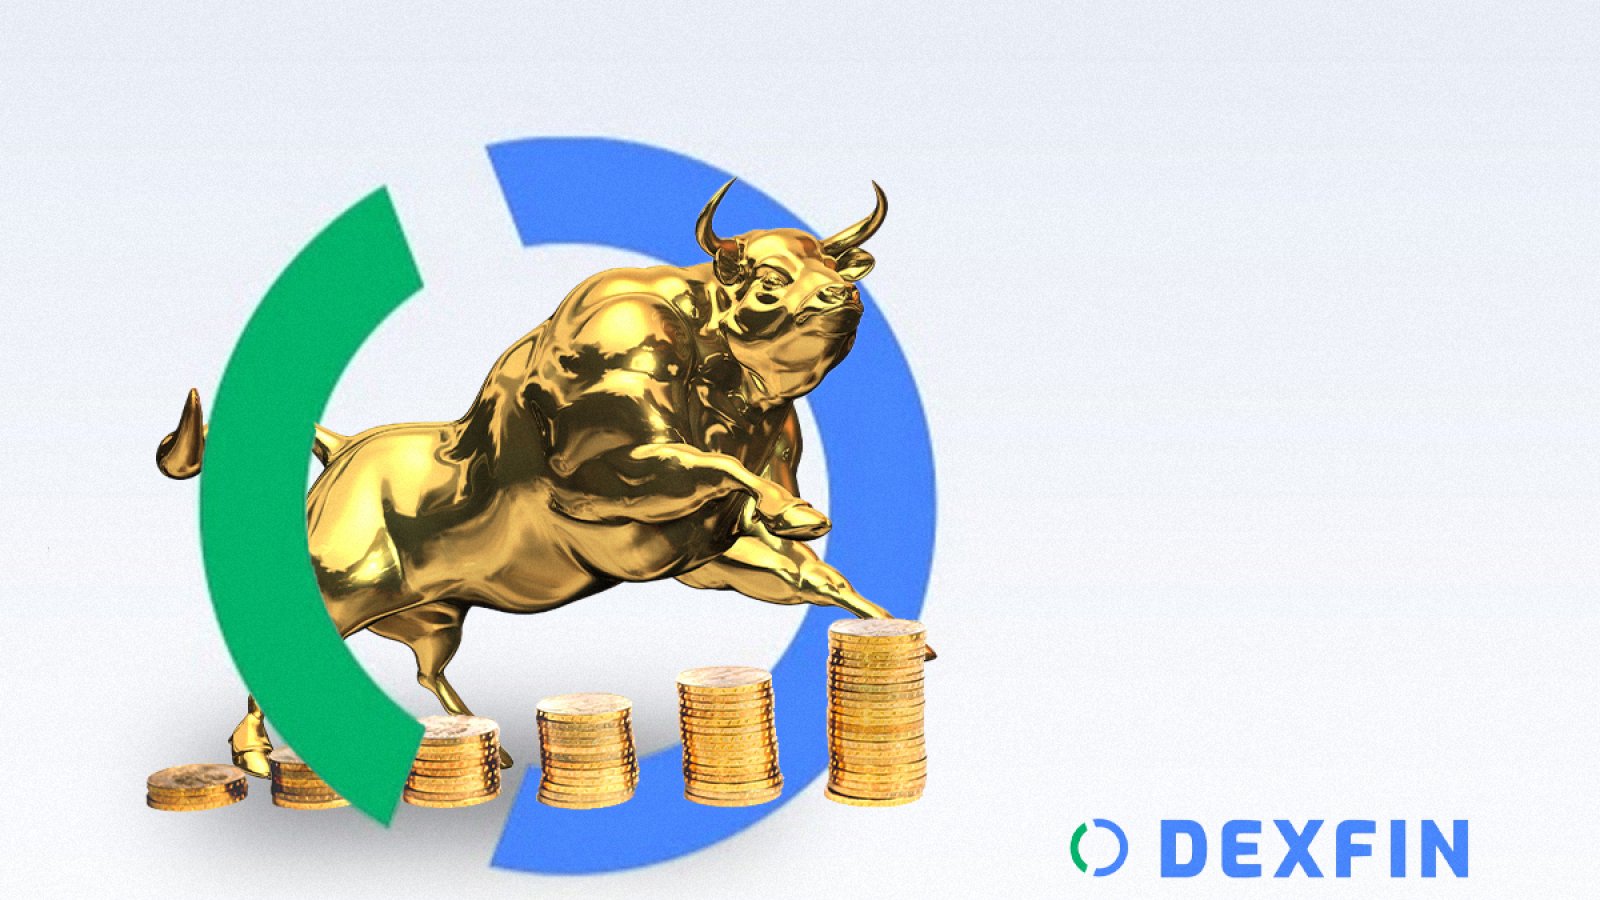 DEXFIN Launching European Crypto Exchange as a One-Stop Solution for All